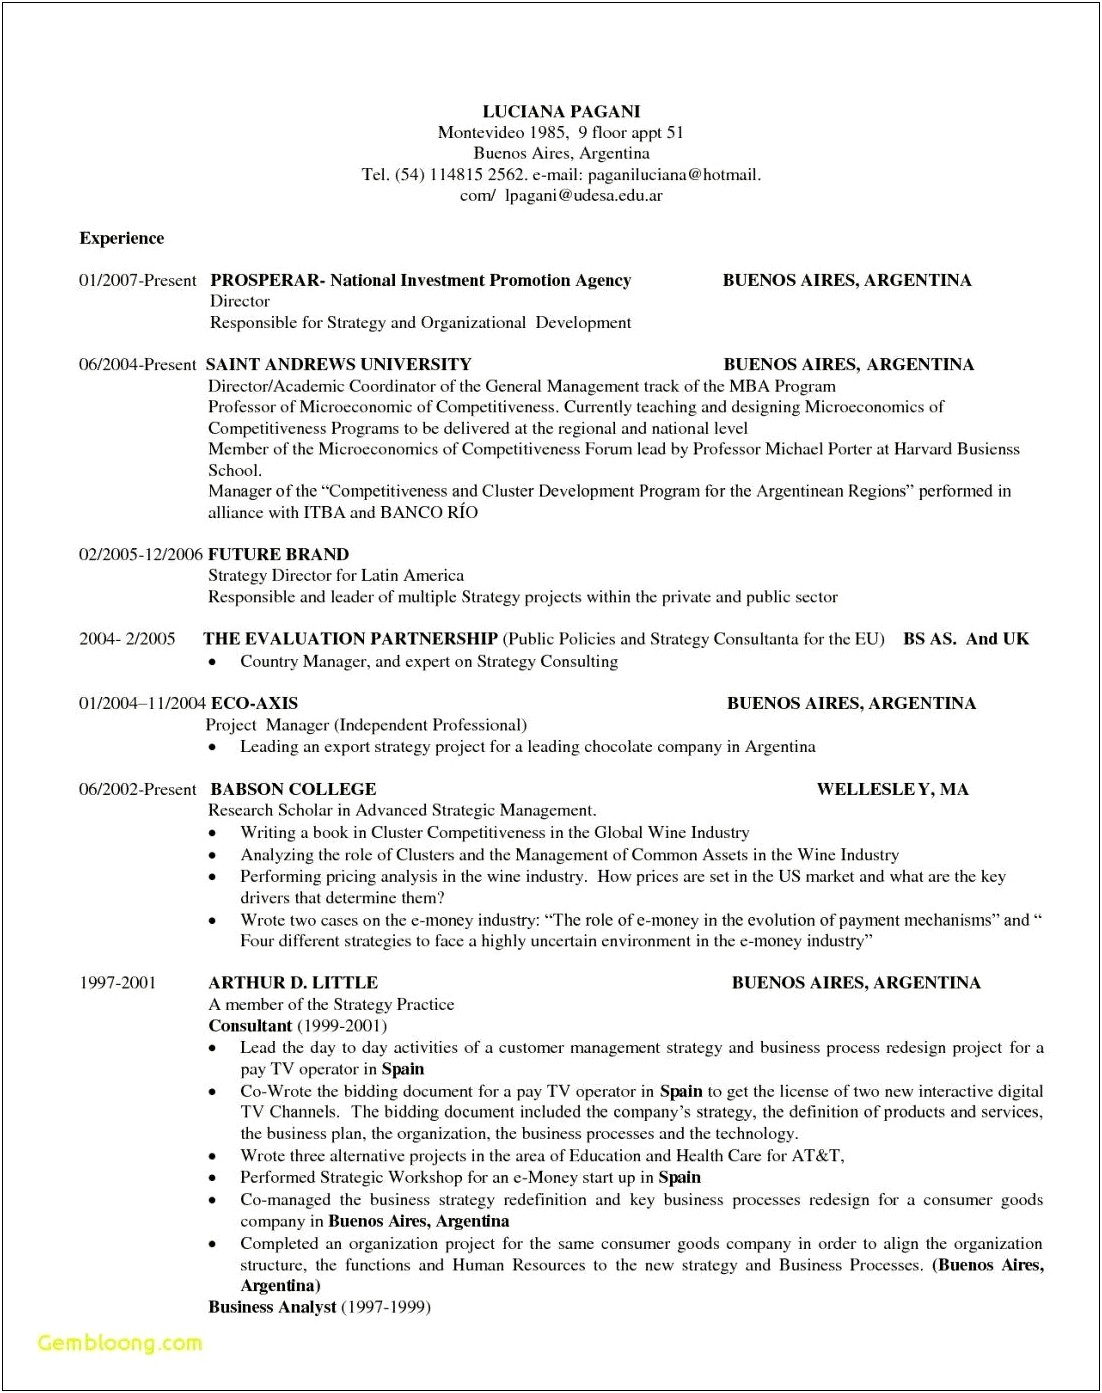 Example Resume For Students Harvard